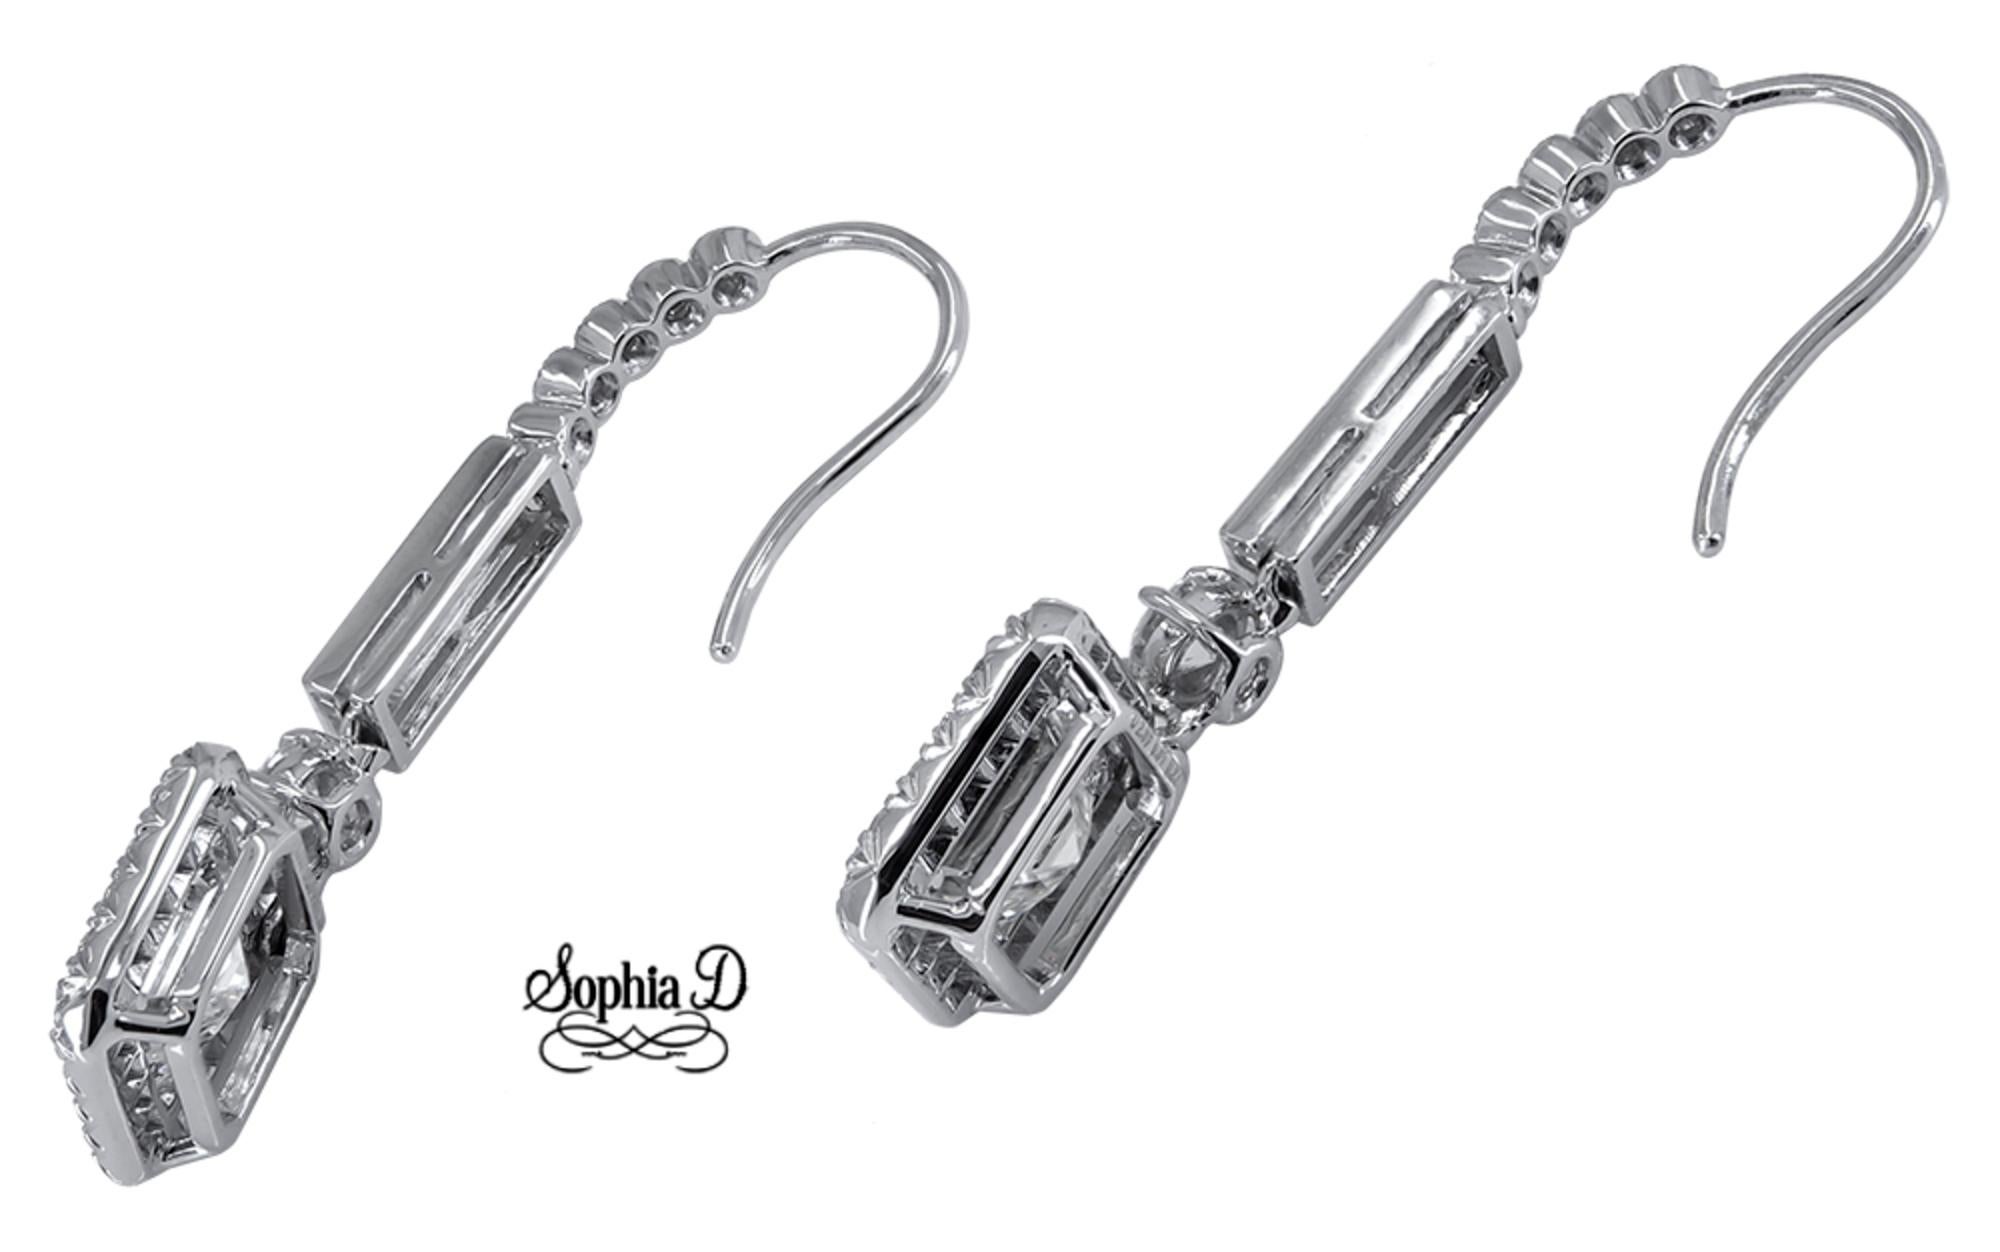 Gorgeous all diamond earrings set in platinum by Sophia D that features a 3.88 carats diamond shape center, square cut diamonds weighing 2.36 carats, baguette cut diamonds weighing 0.61 carats and round diamonds weighing 0.91 carats.

Sophia D by